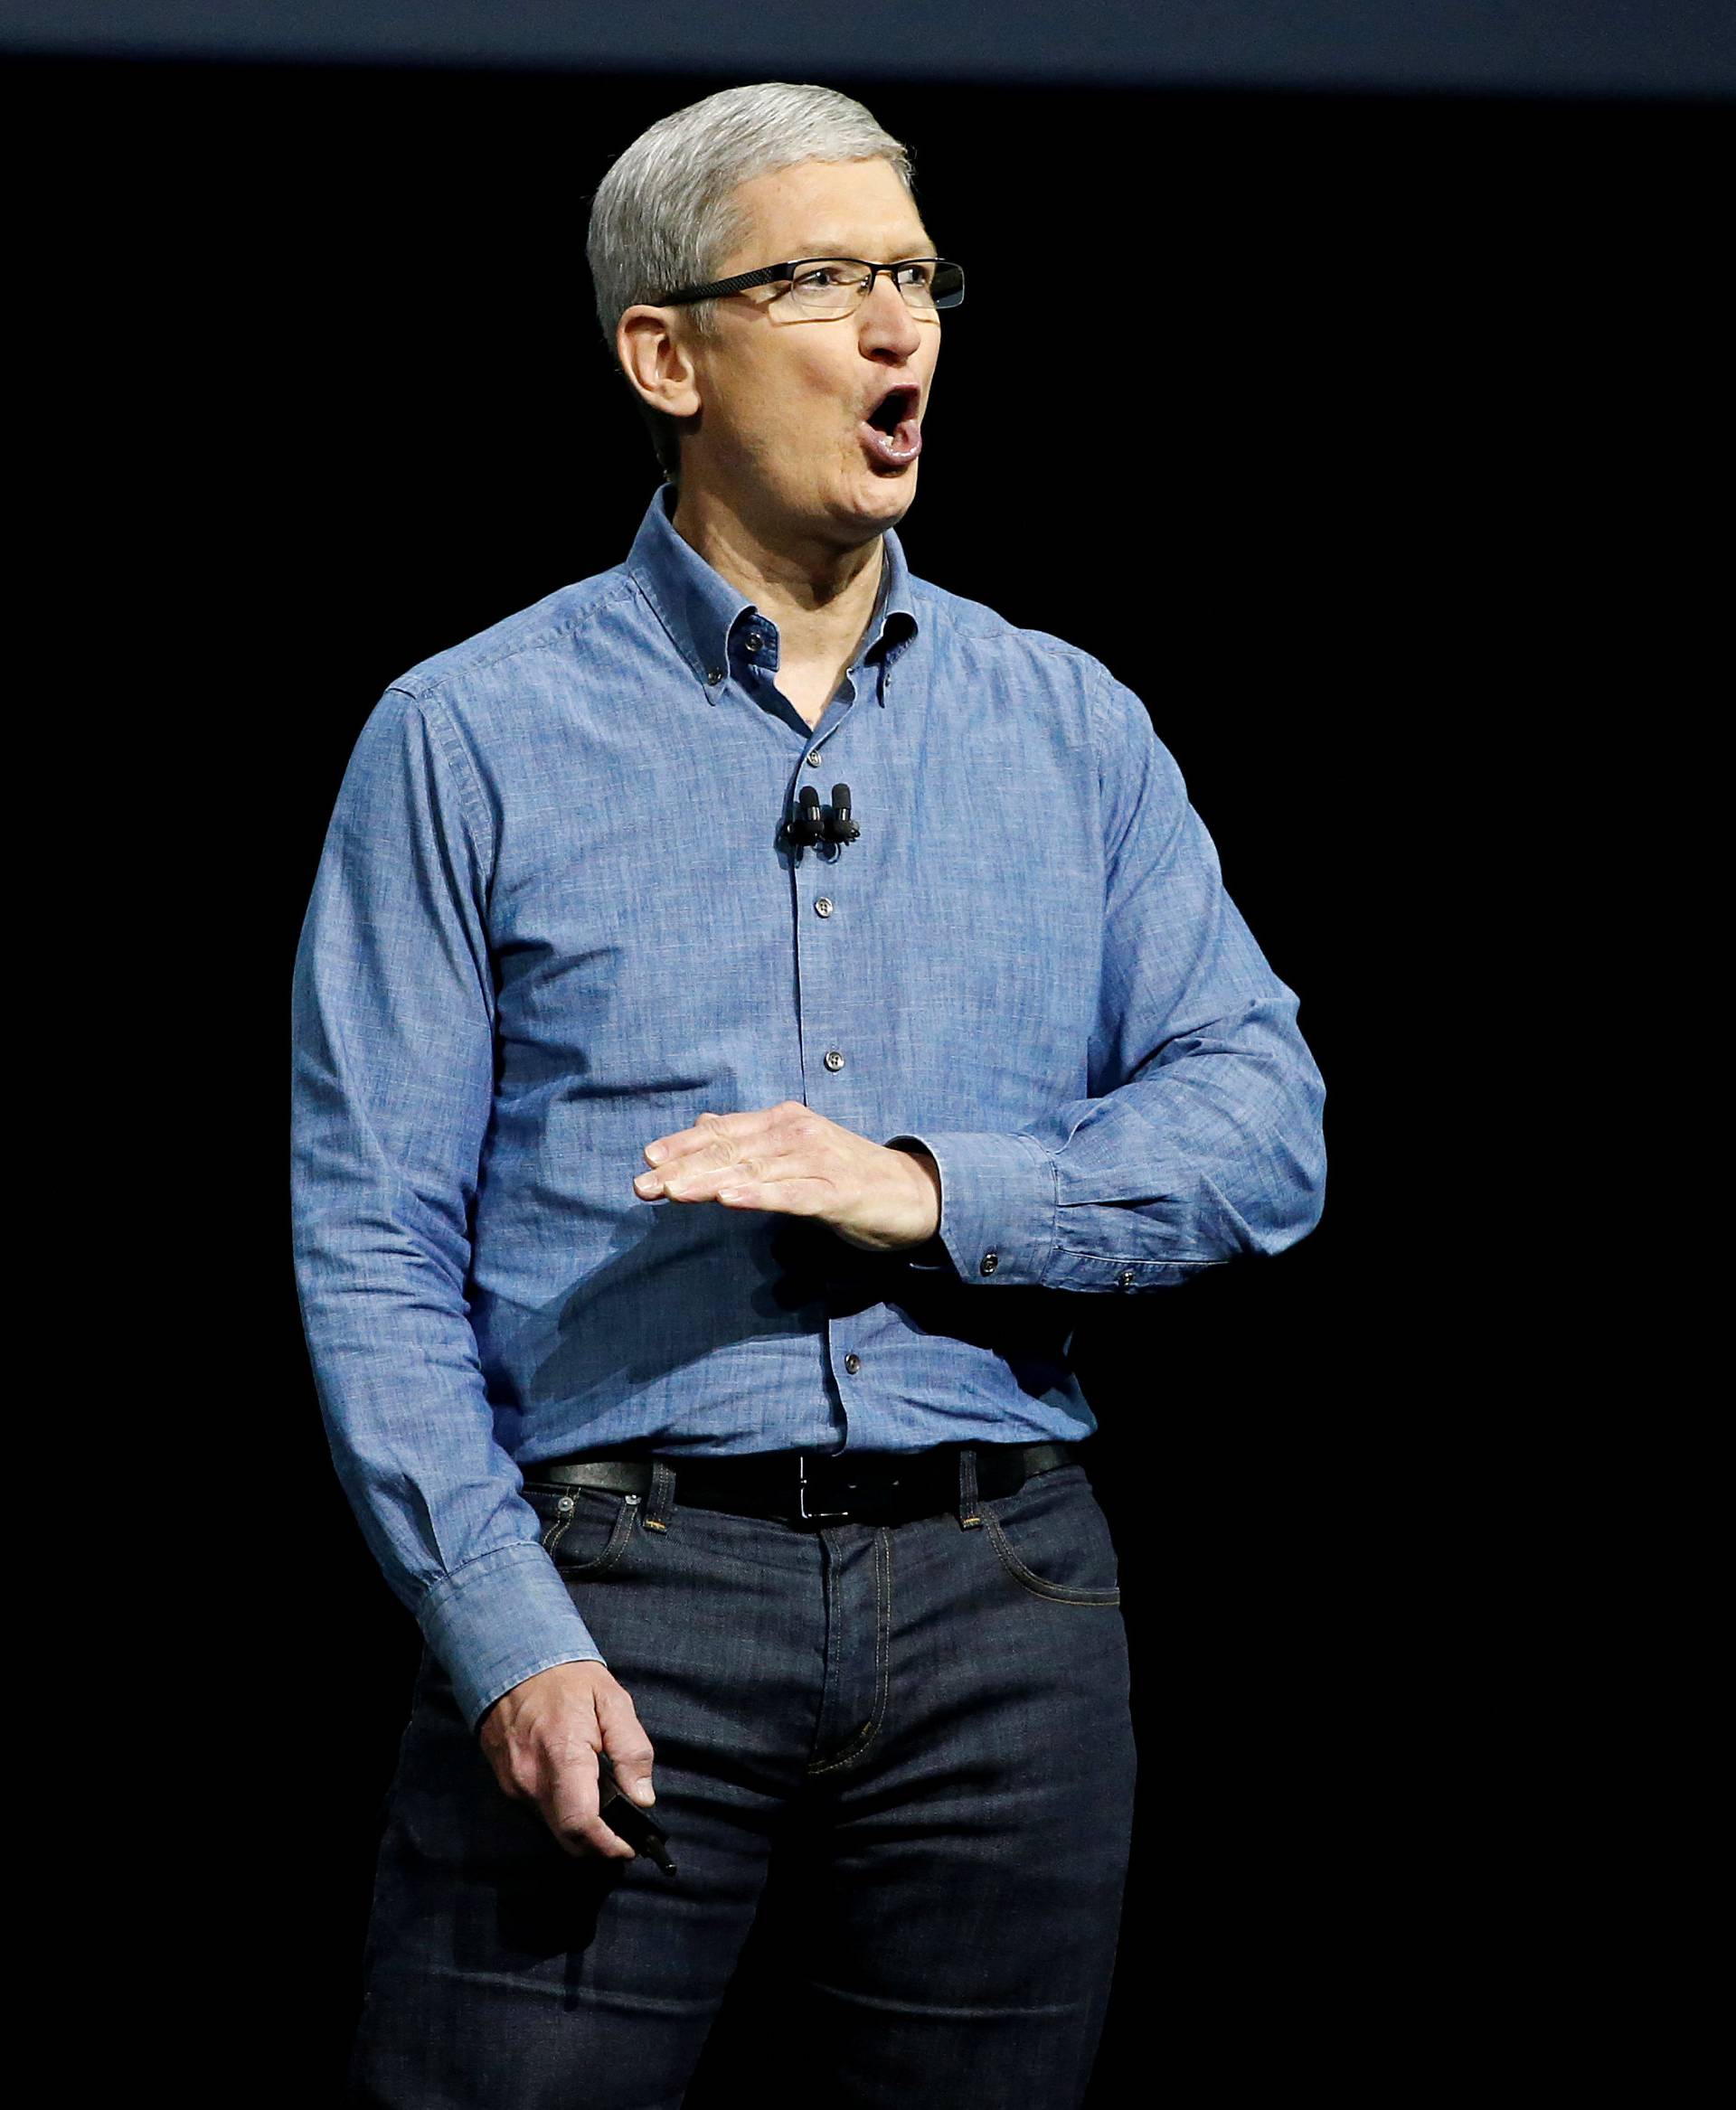 Apple Inc. CEO Cook speaks on stage at the company's World Wide Developers Conference in San Francisco